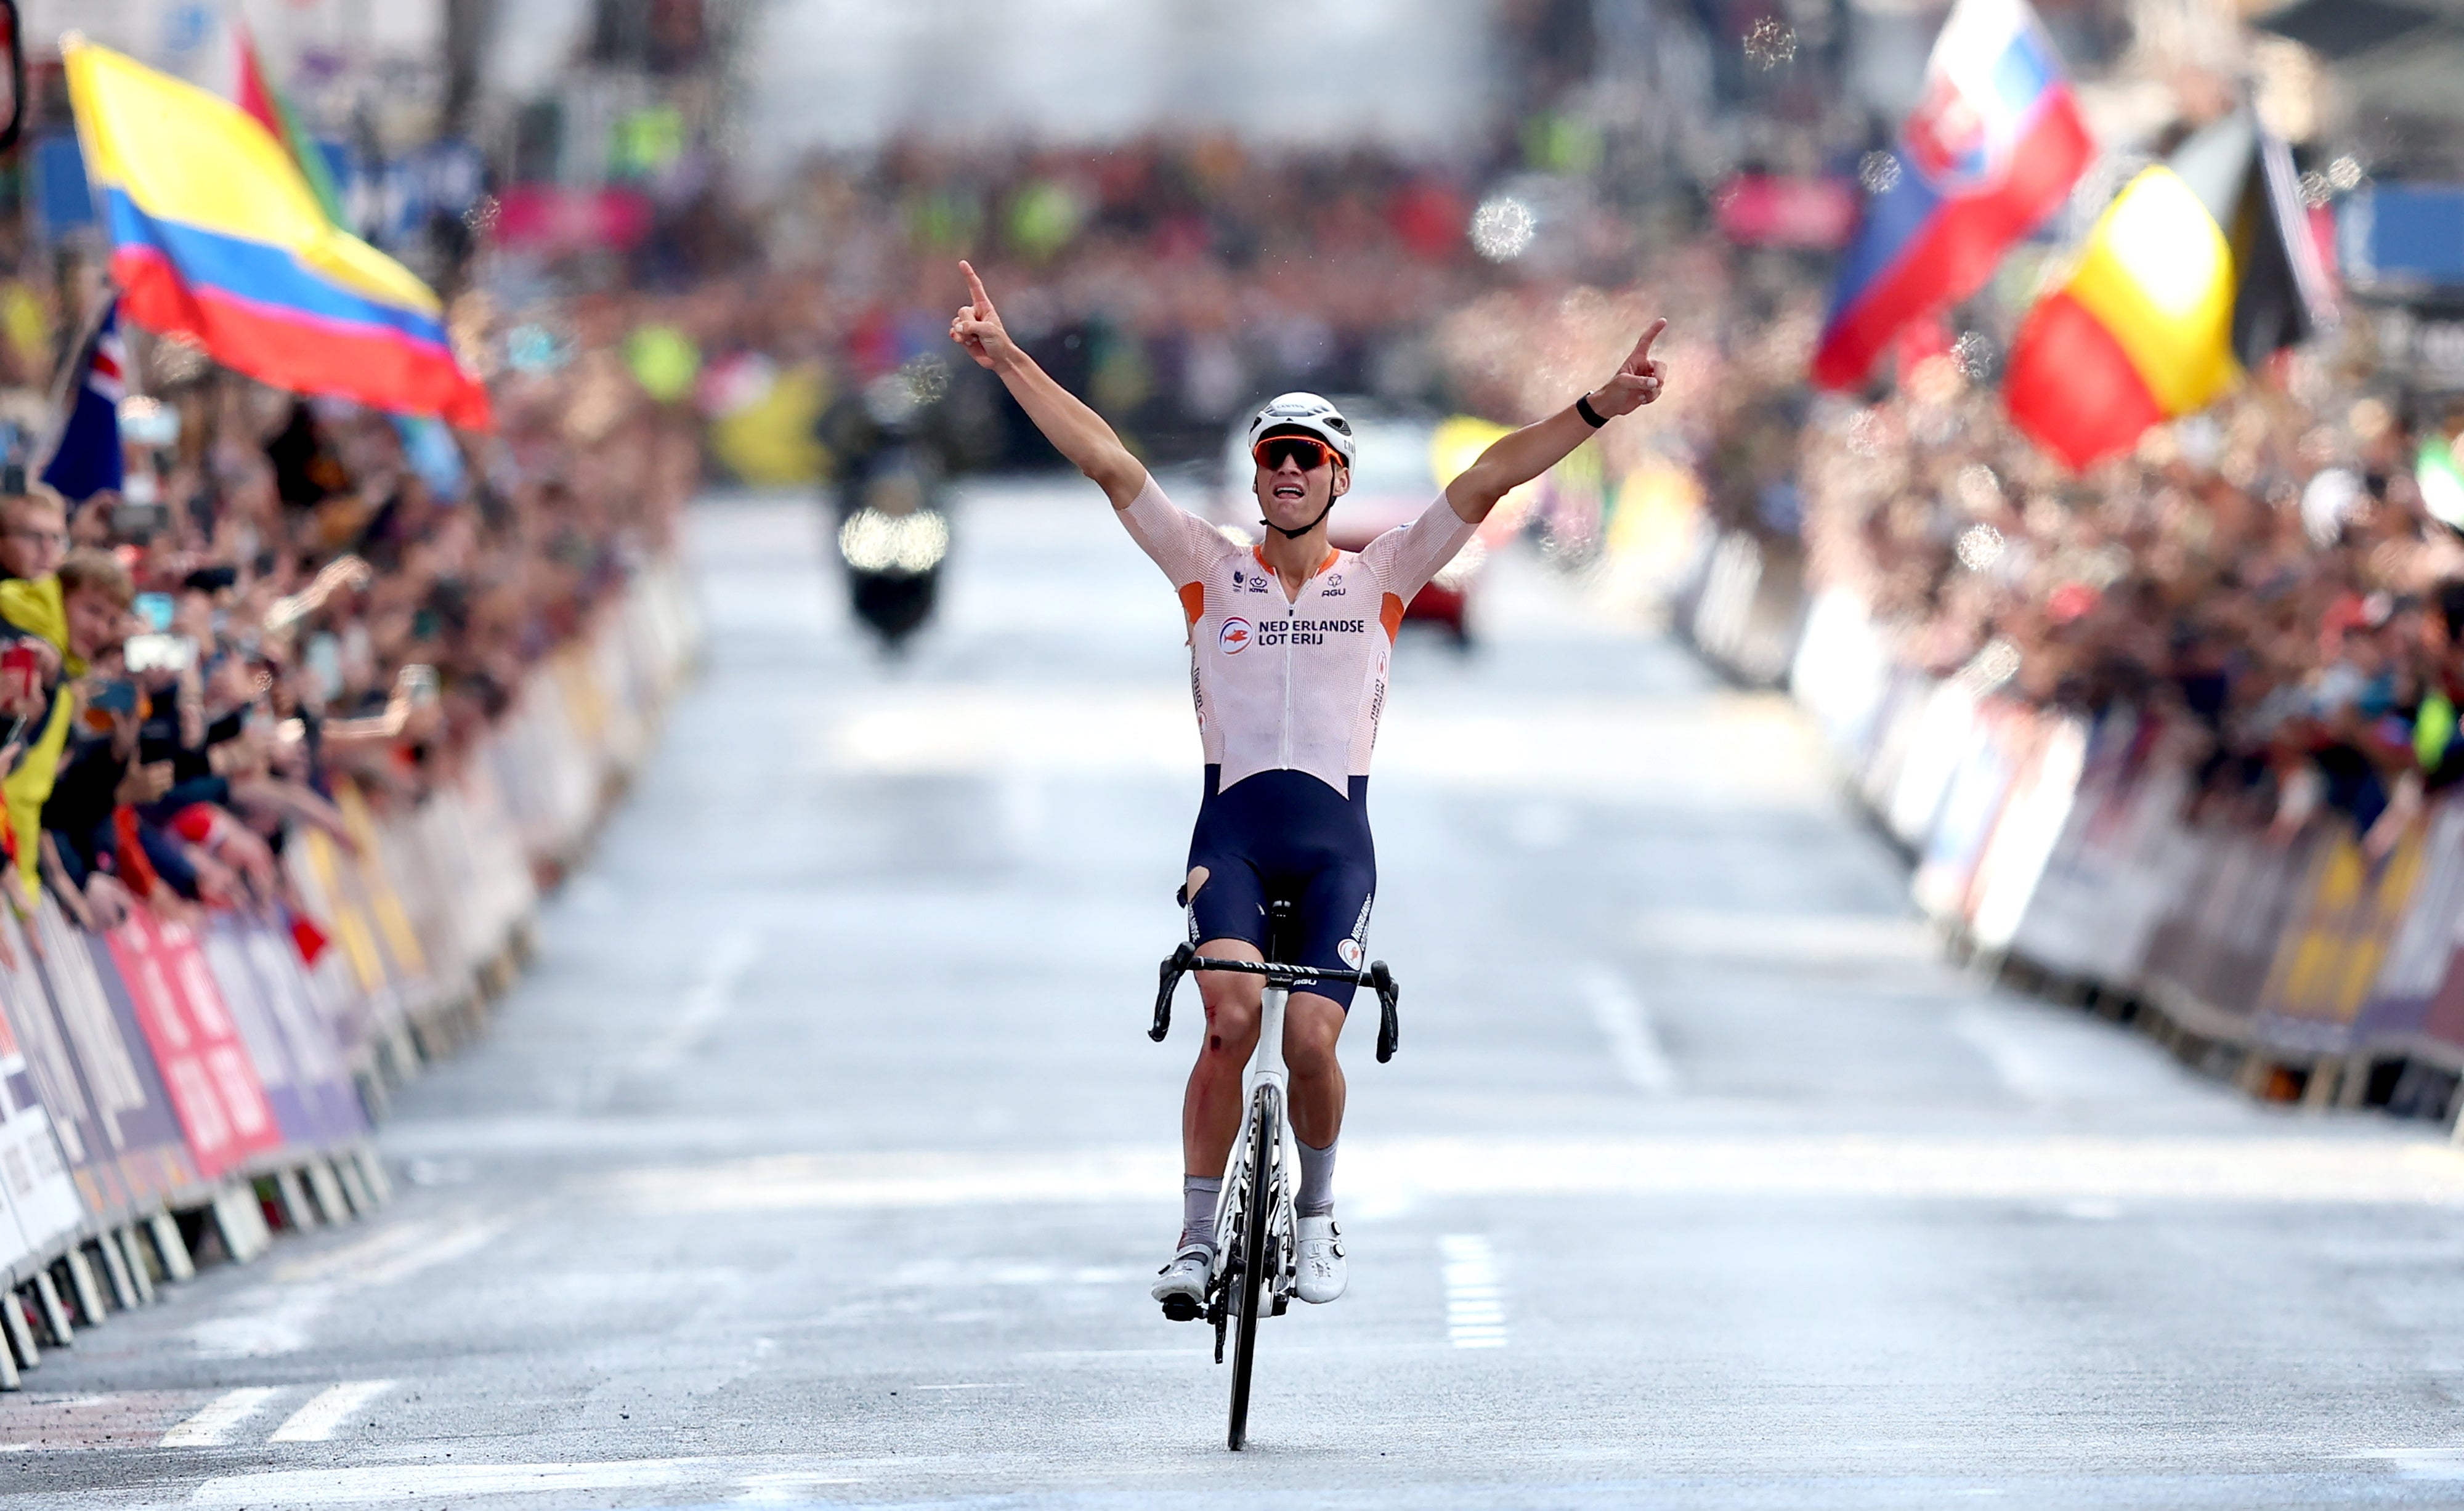 Mathieu van der Poel wins UCI World Championships after race hit by protestors The Independent